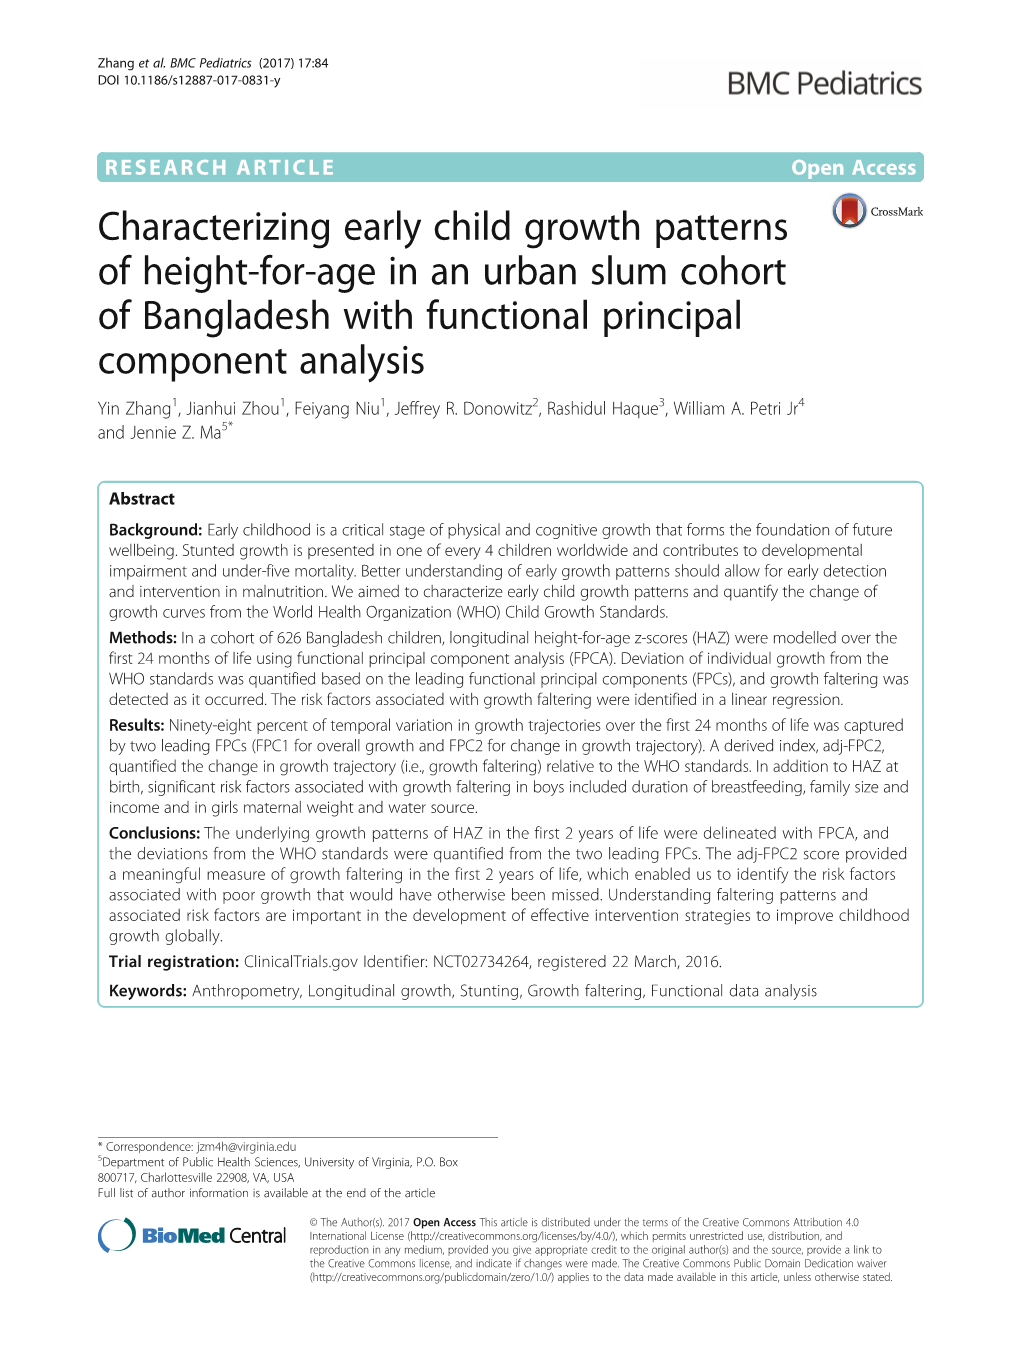 Characterizing Early Child Growth Patterns of Height-For-Age in An